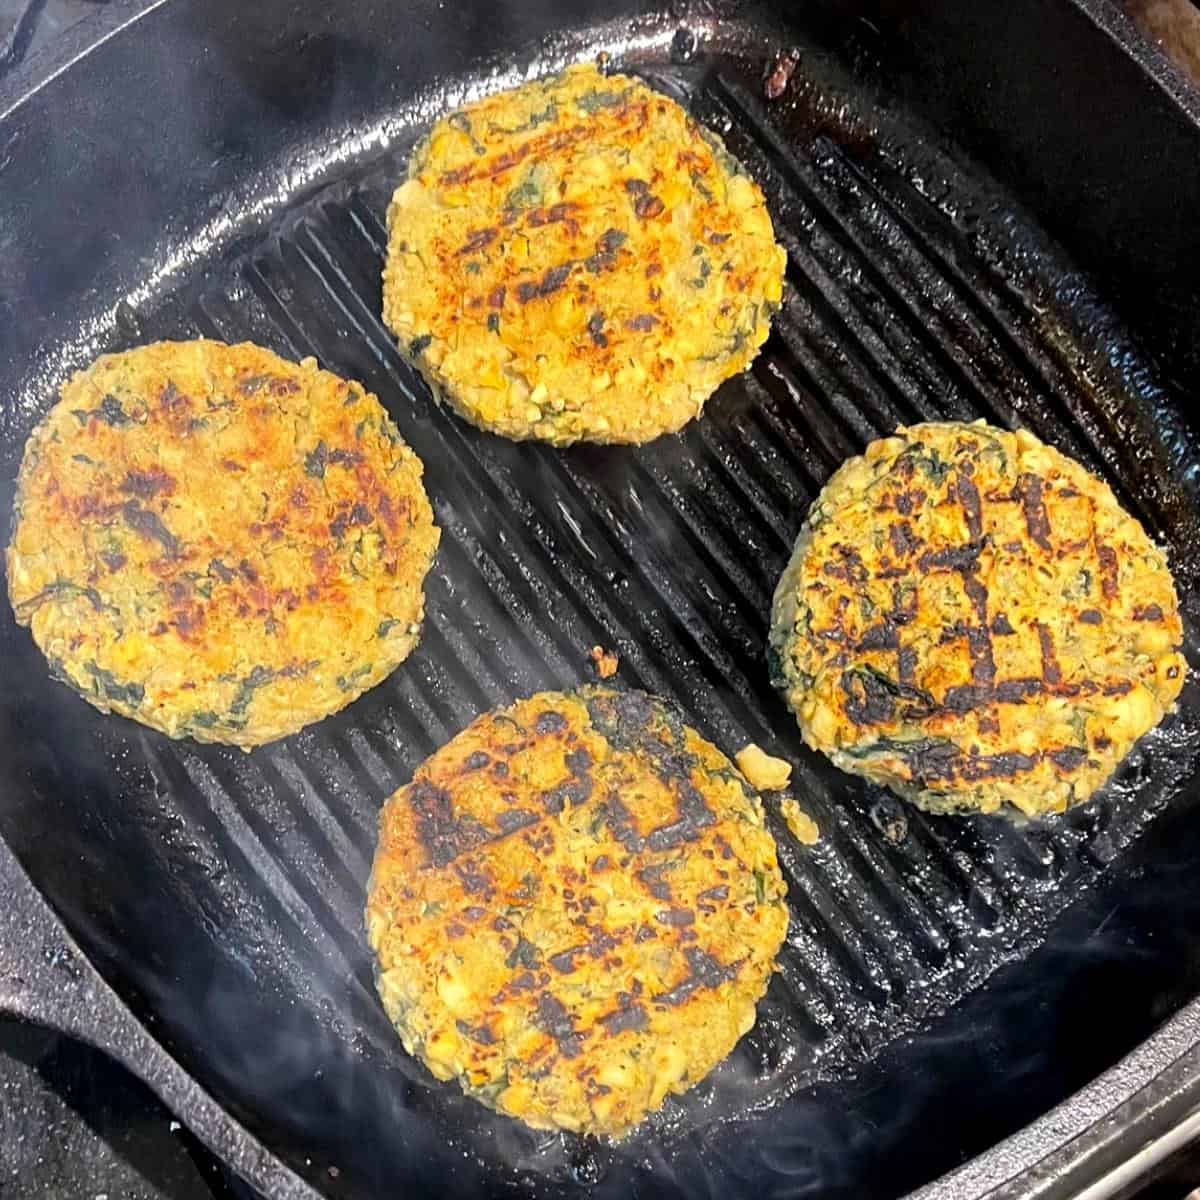 Chickpea quinoa burgers with cross hatch pattern on grill pan.